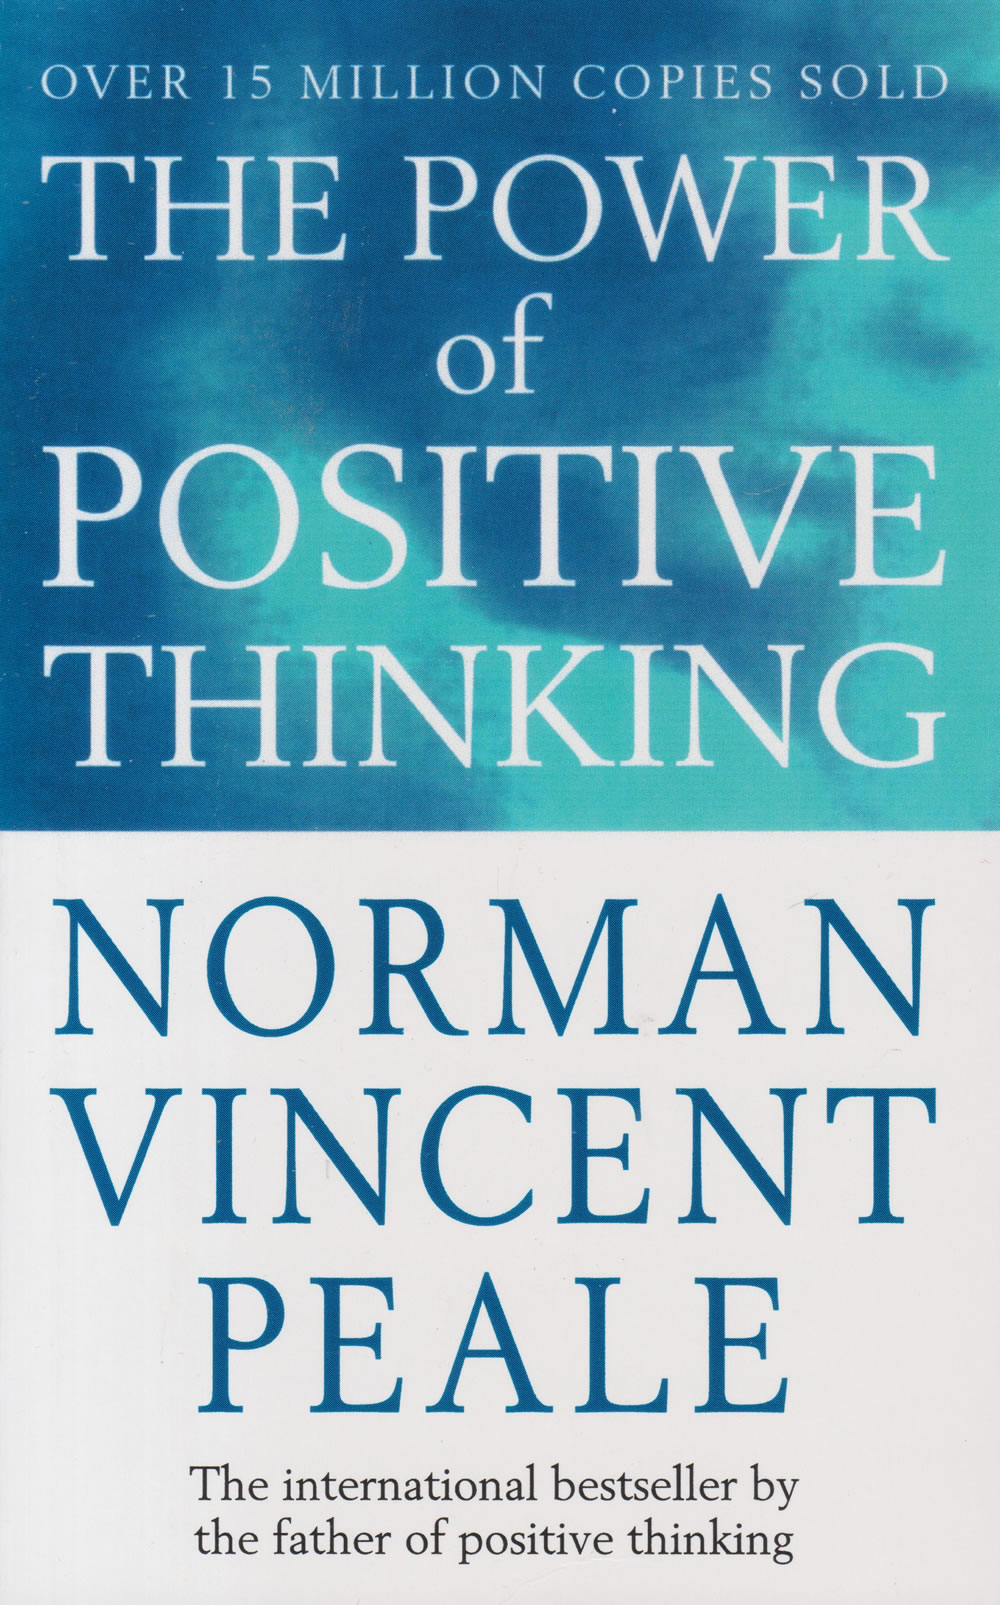 The Power of Positive Thinking book by Norman Vincent Peale